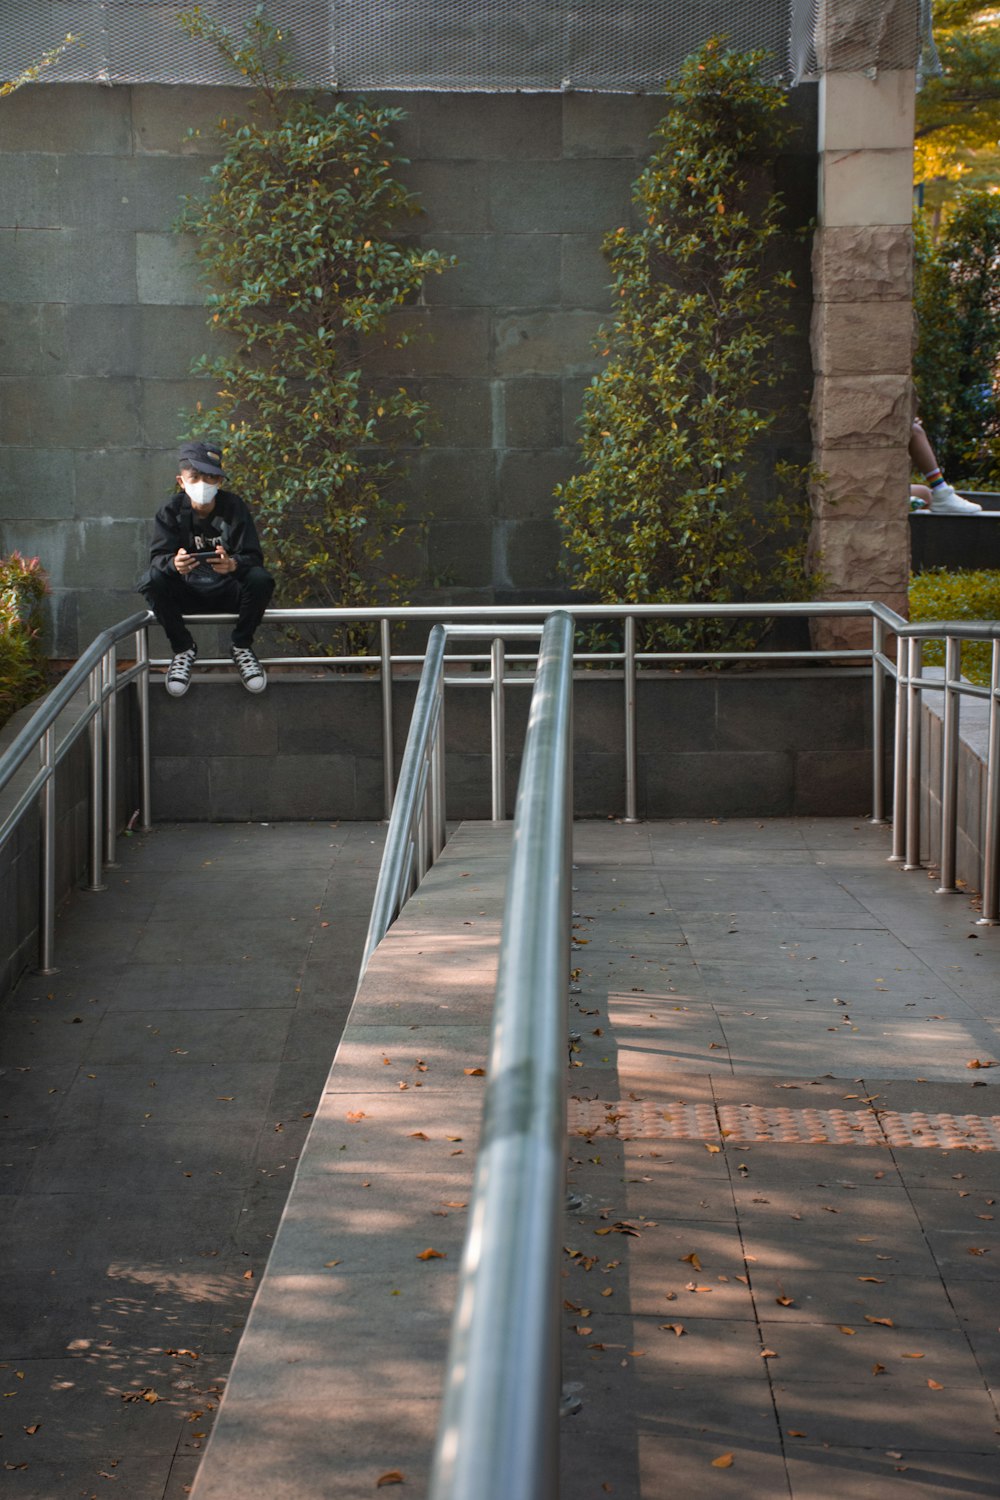 a person sitting on a metal railing